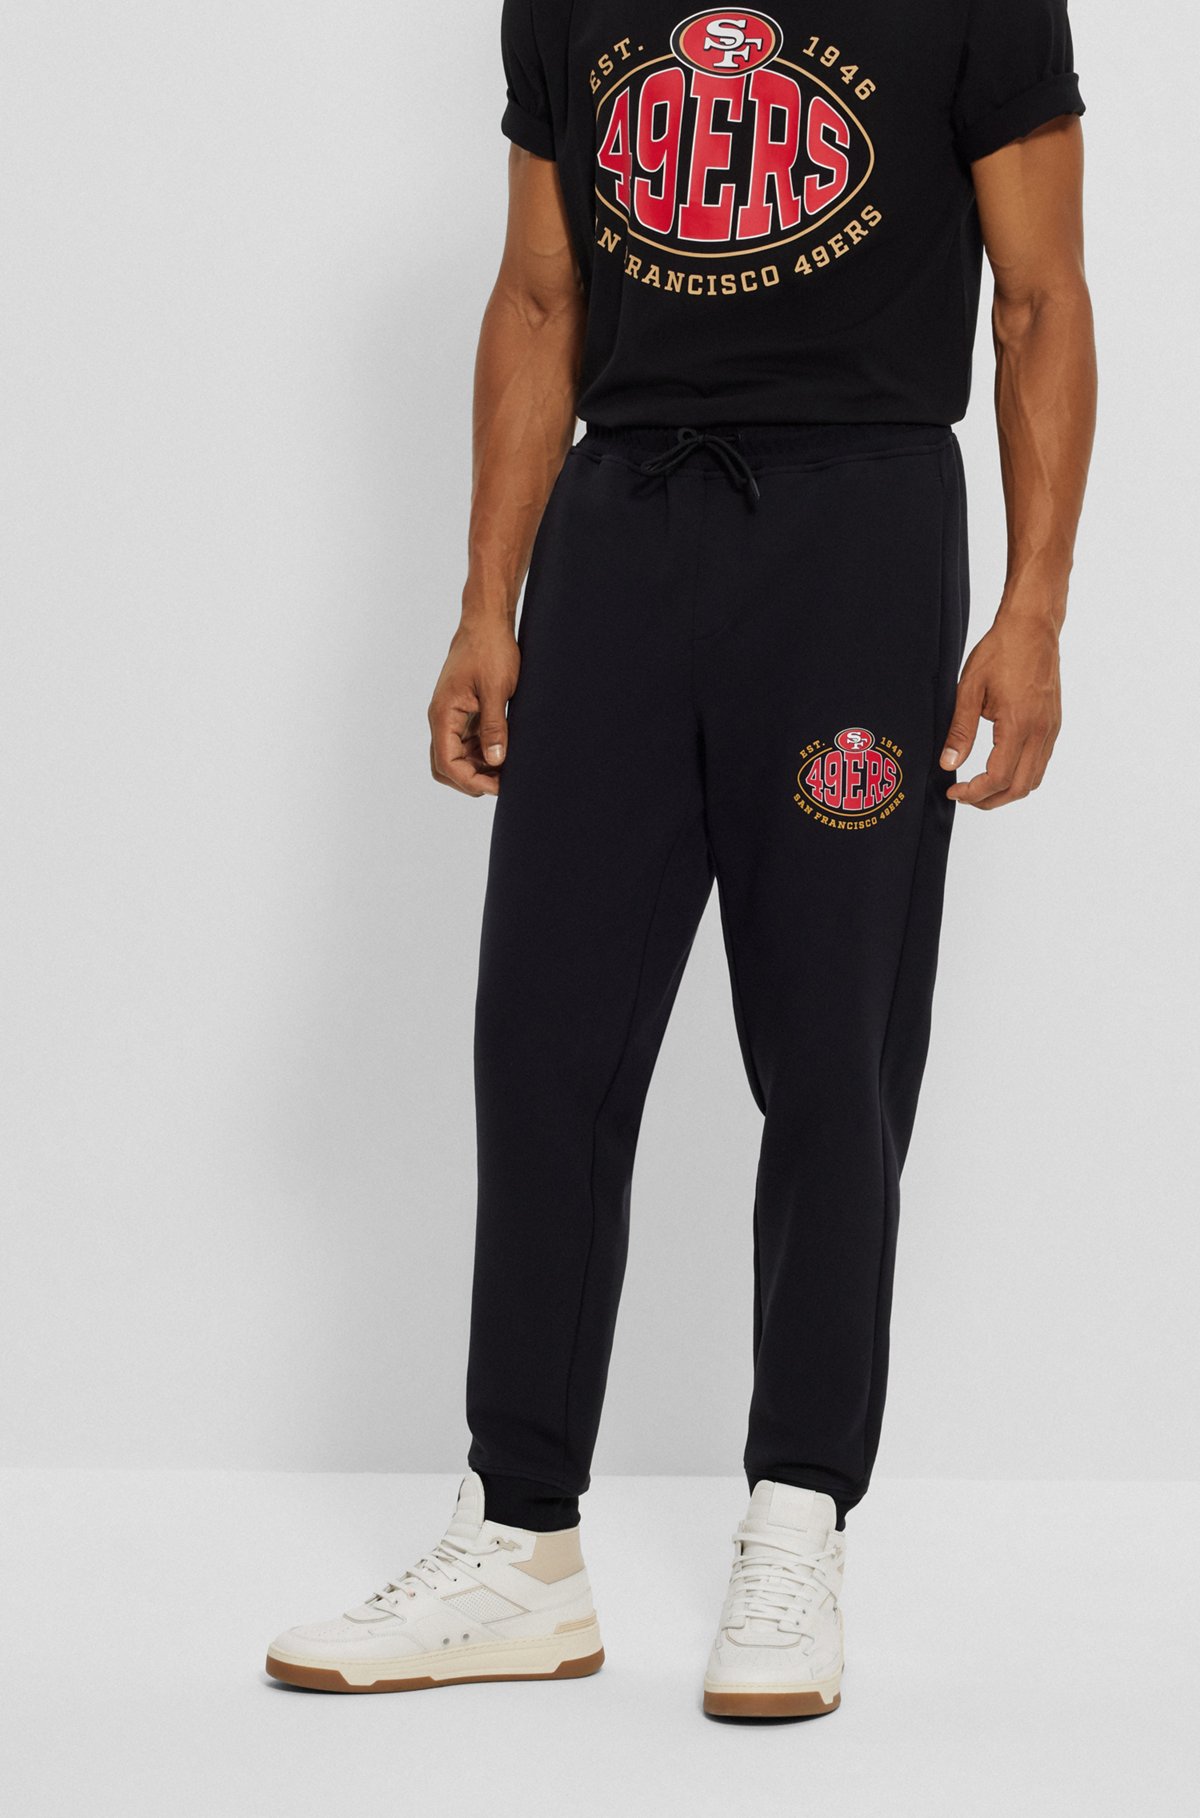 49ers tracksuit